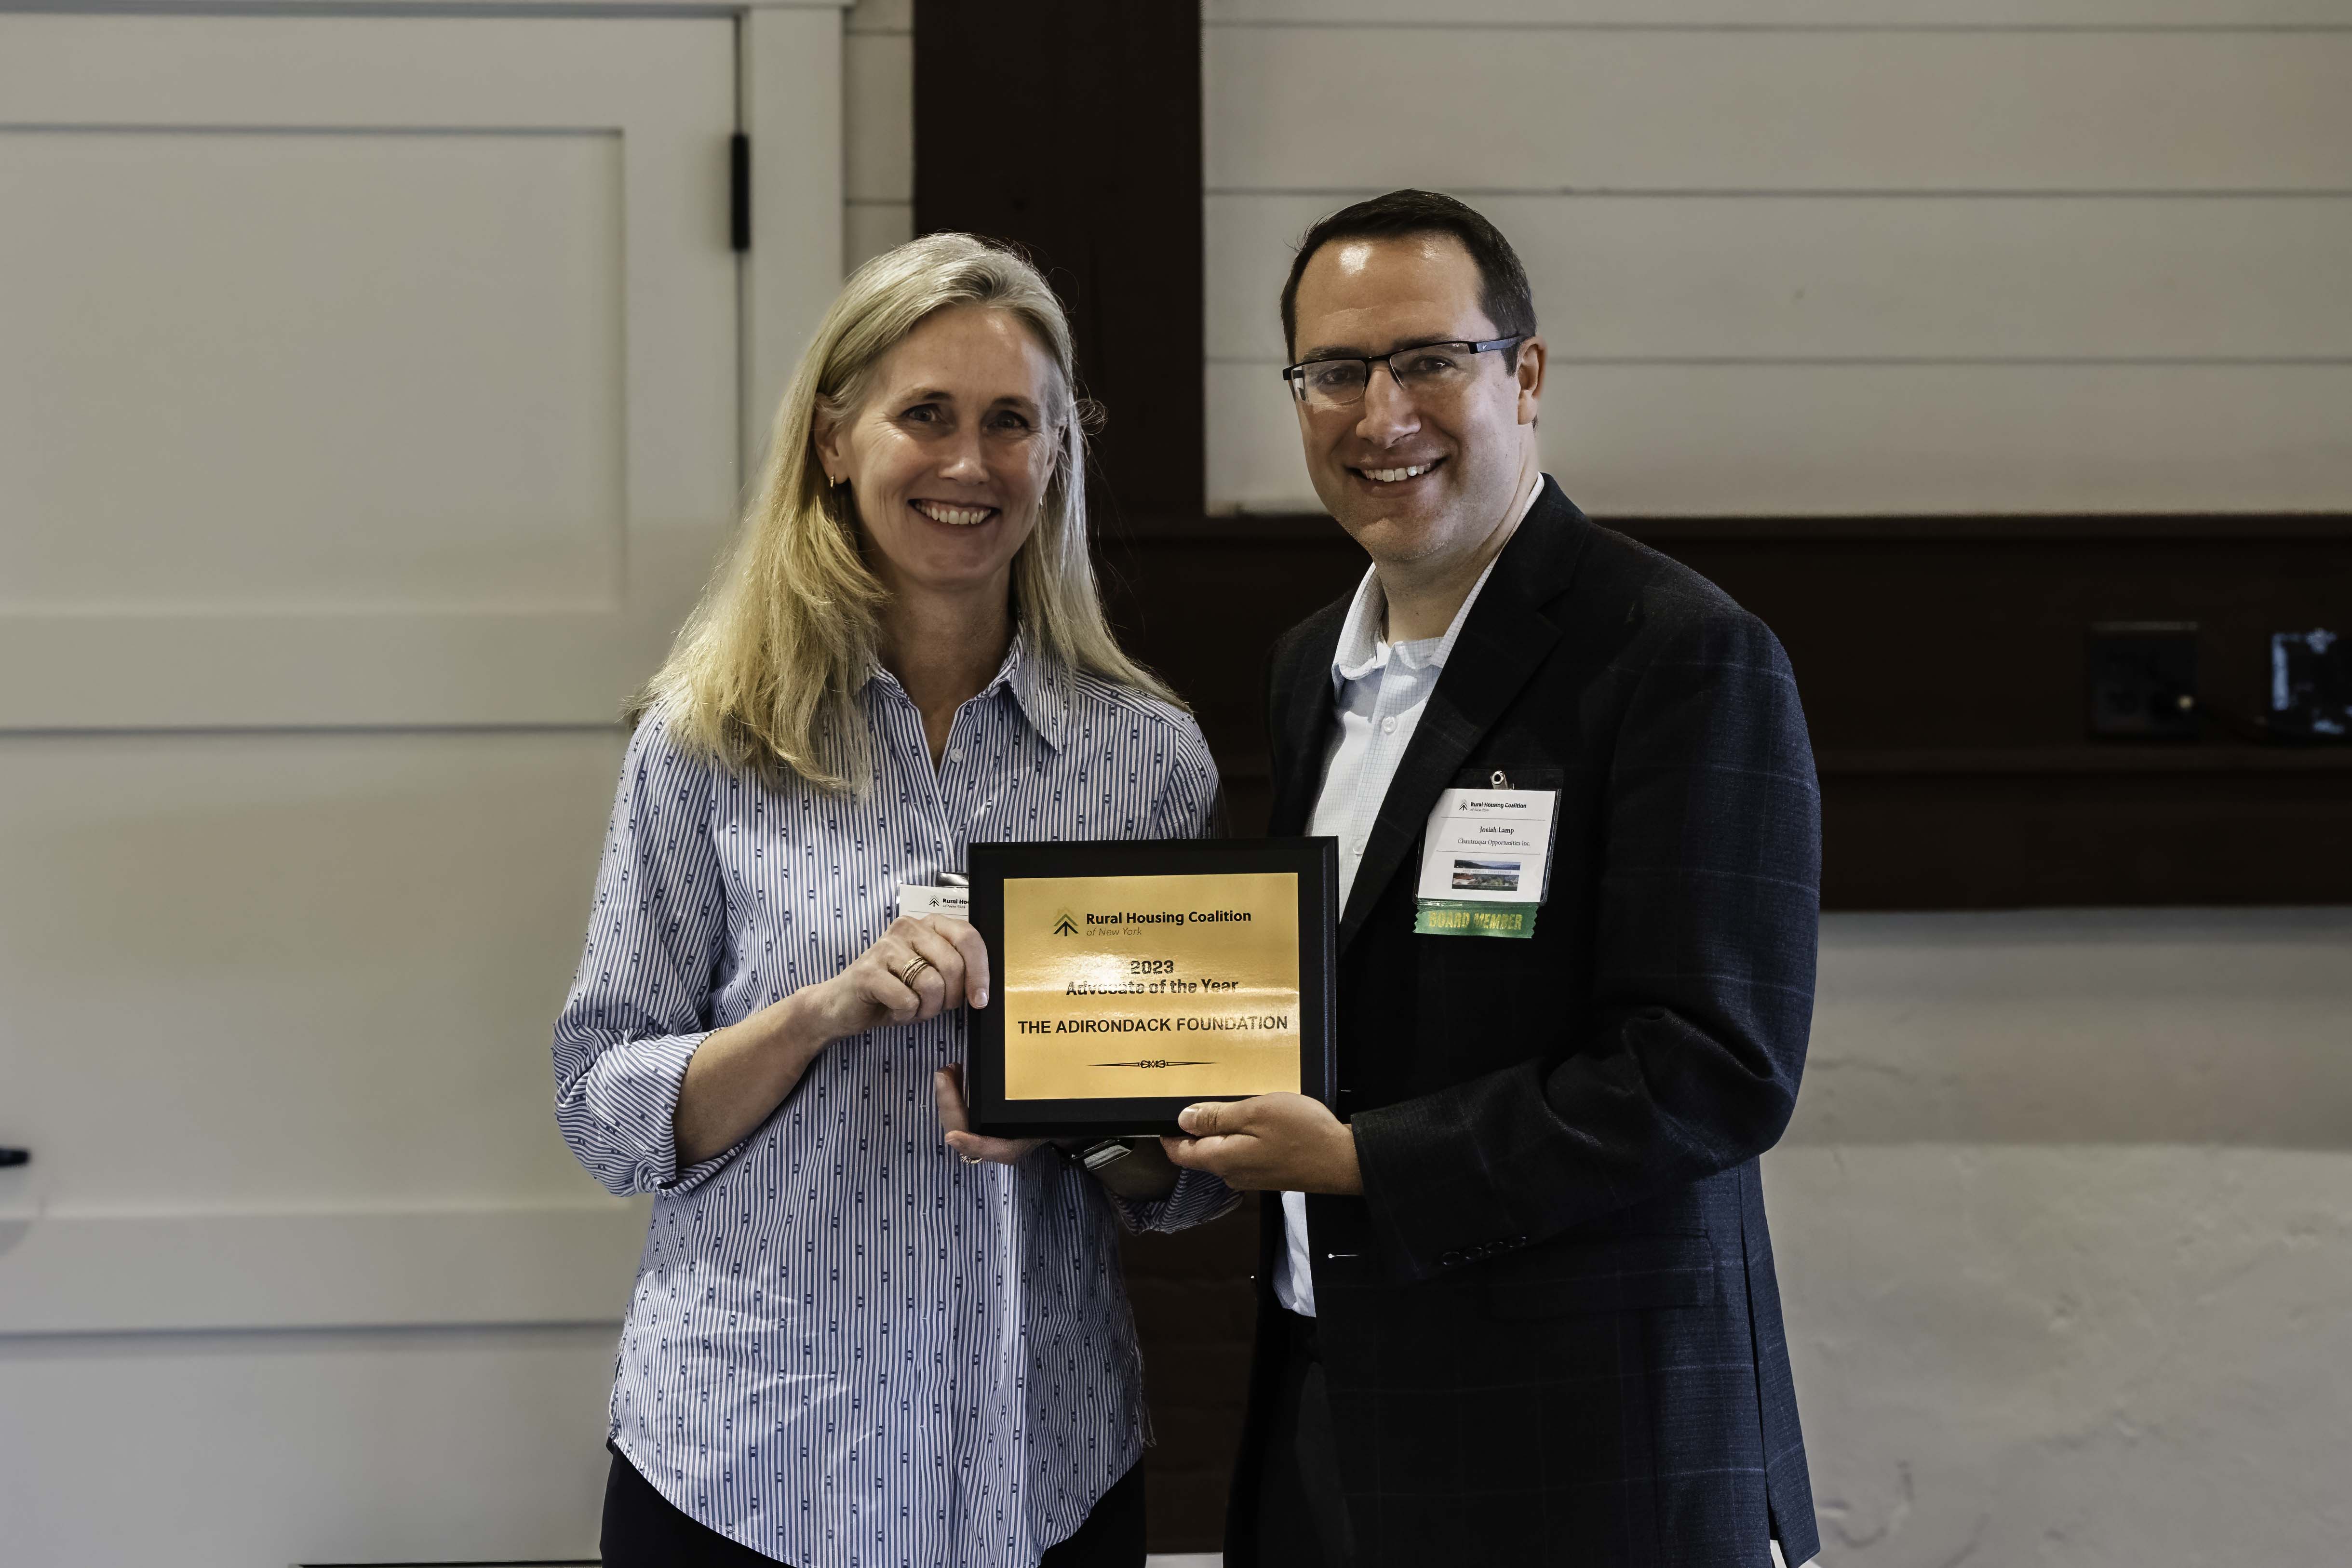 Josiah Lamp, chair of the Rural Housing Coalition (RHC), presents Adirondack Foundation Vice President for Community Impact Lori Bellingham with the 2023 Advocate of the Year at RHC's annual meeting in Lake George.